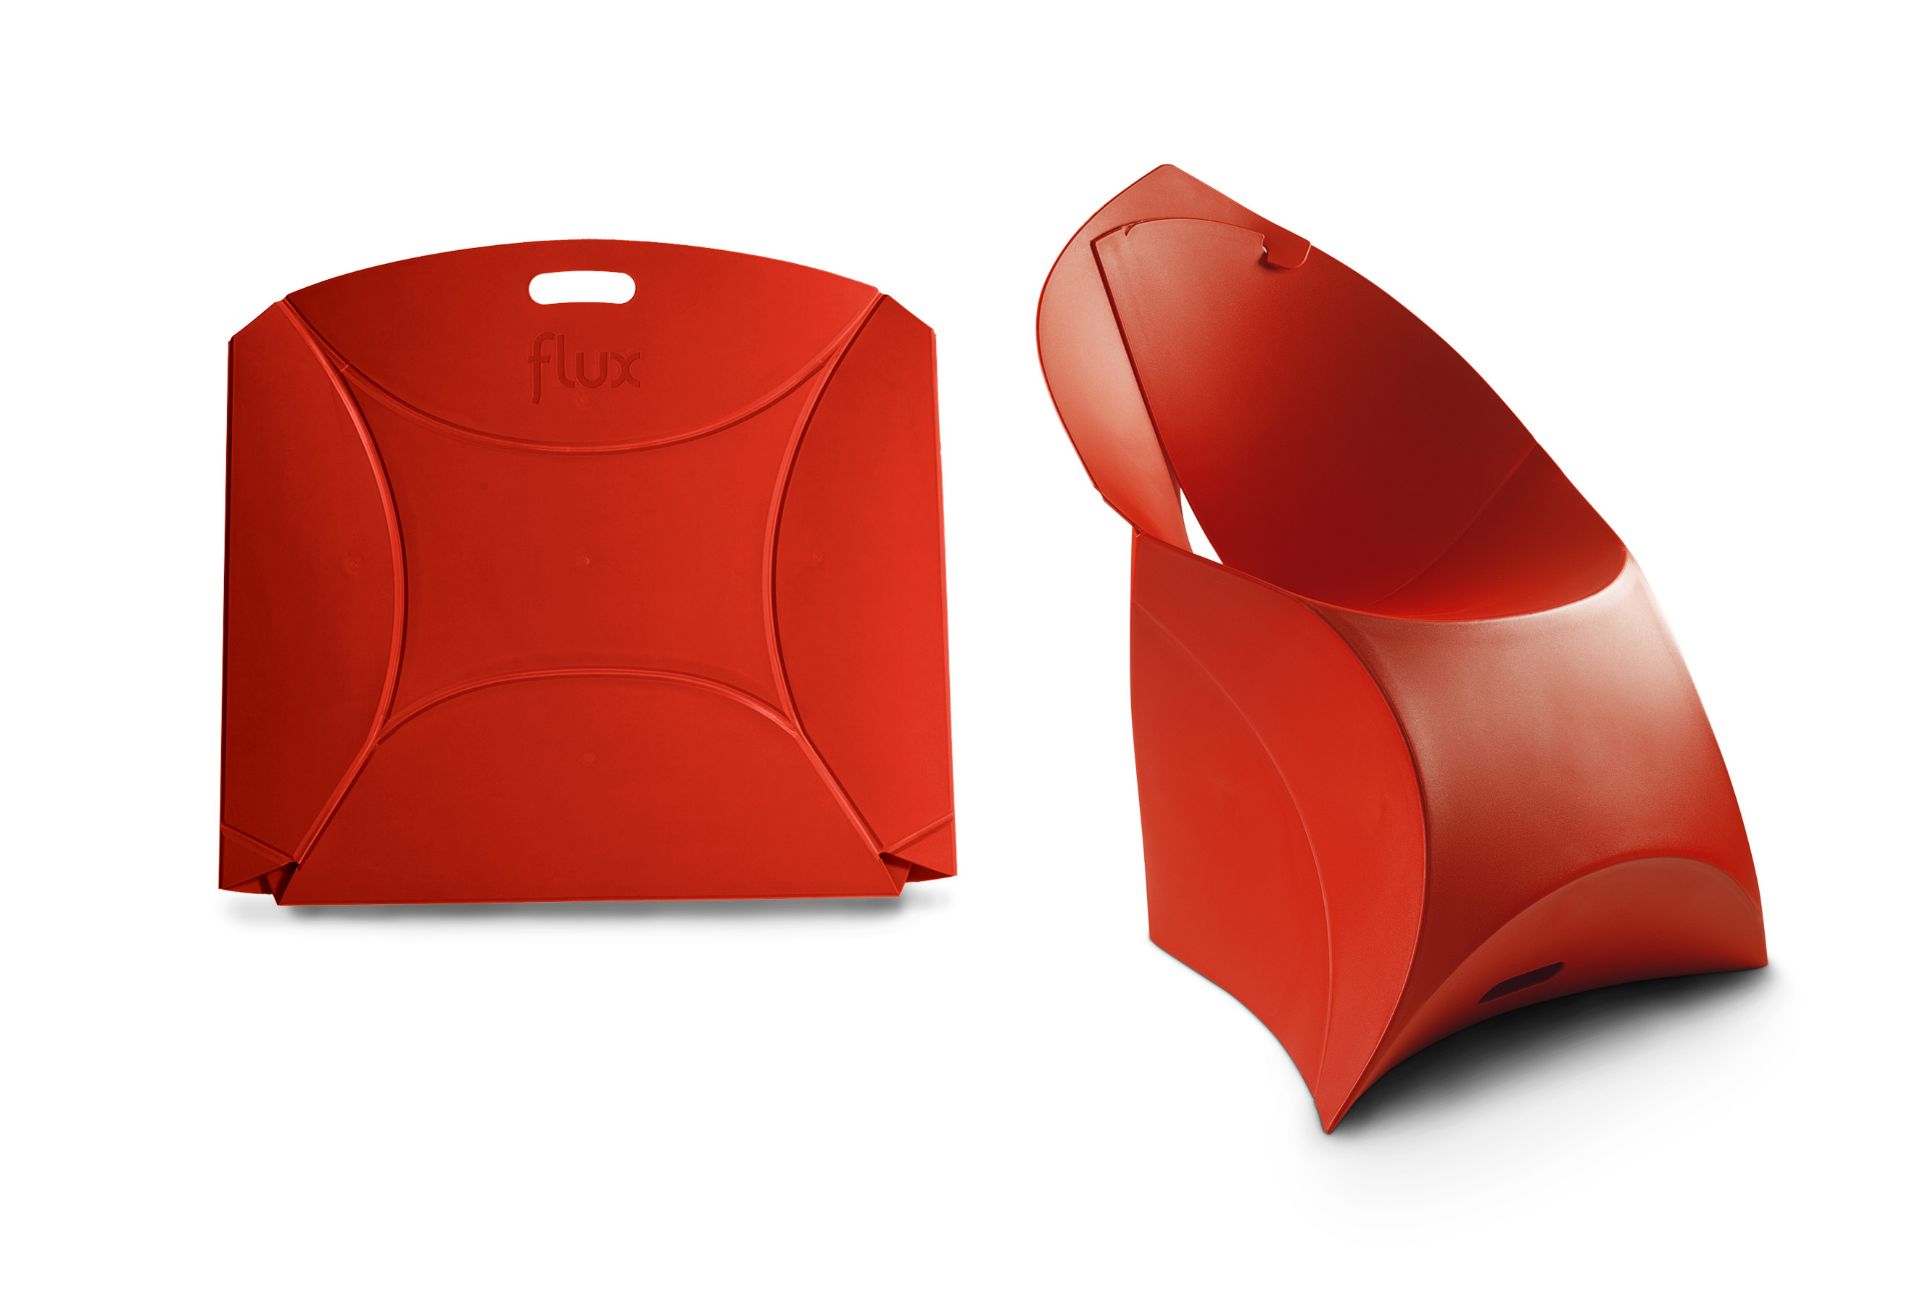 The Flux Foldable Chair . Our Award-Winning Dutch Design. - Red - Used - RRP £120